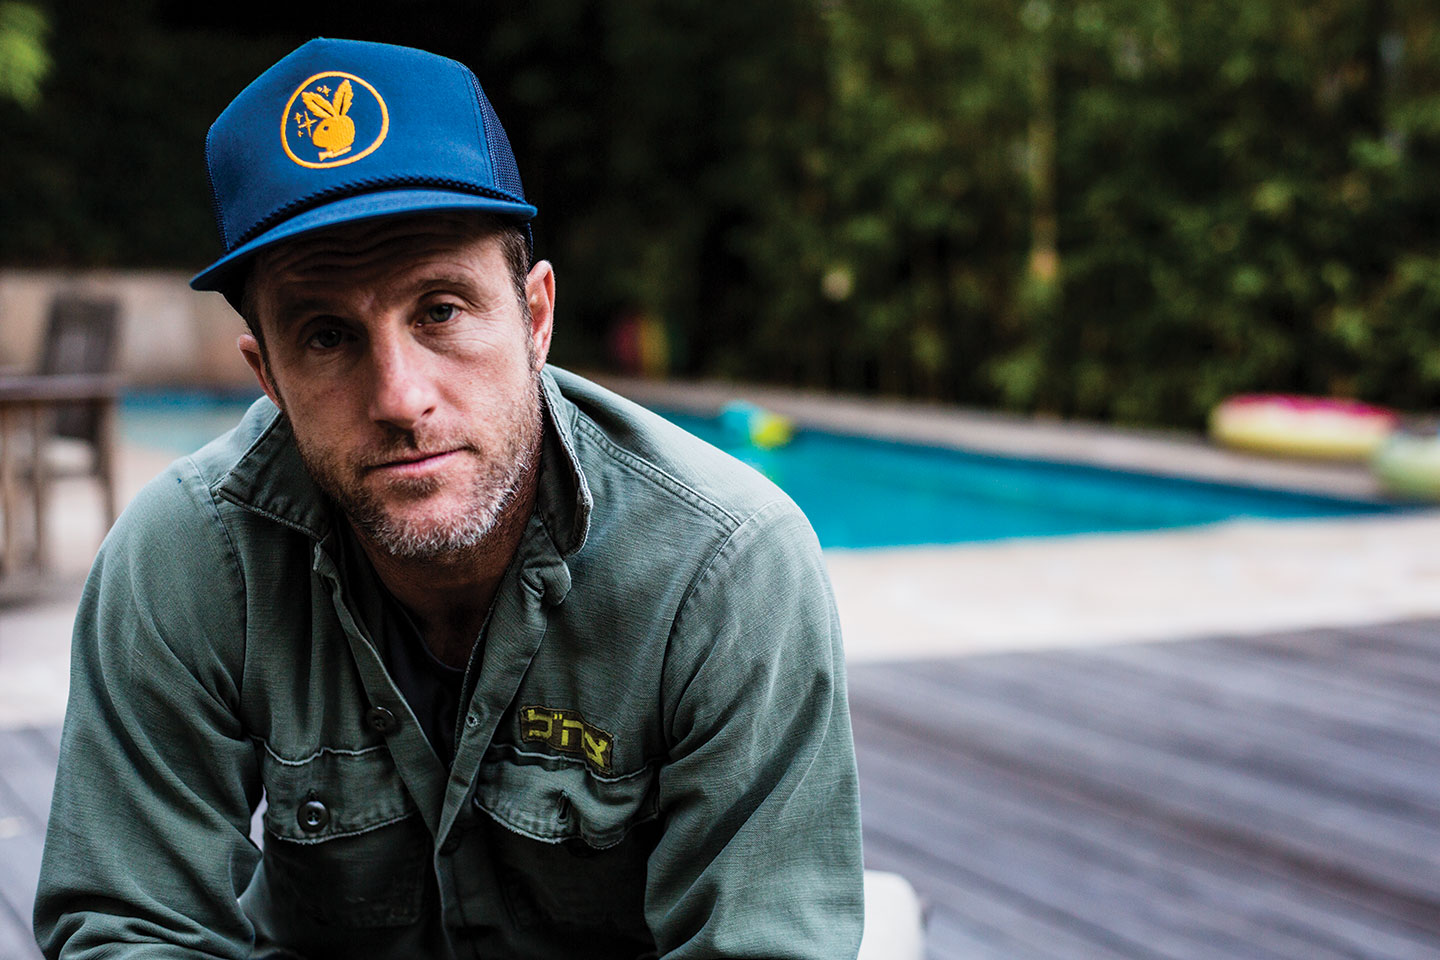 Scott Caan Rides The Hollywood Wave His Own Way1440 x 960